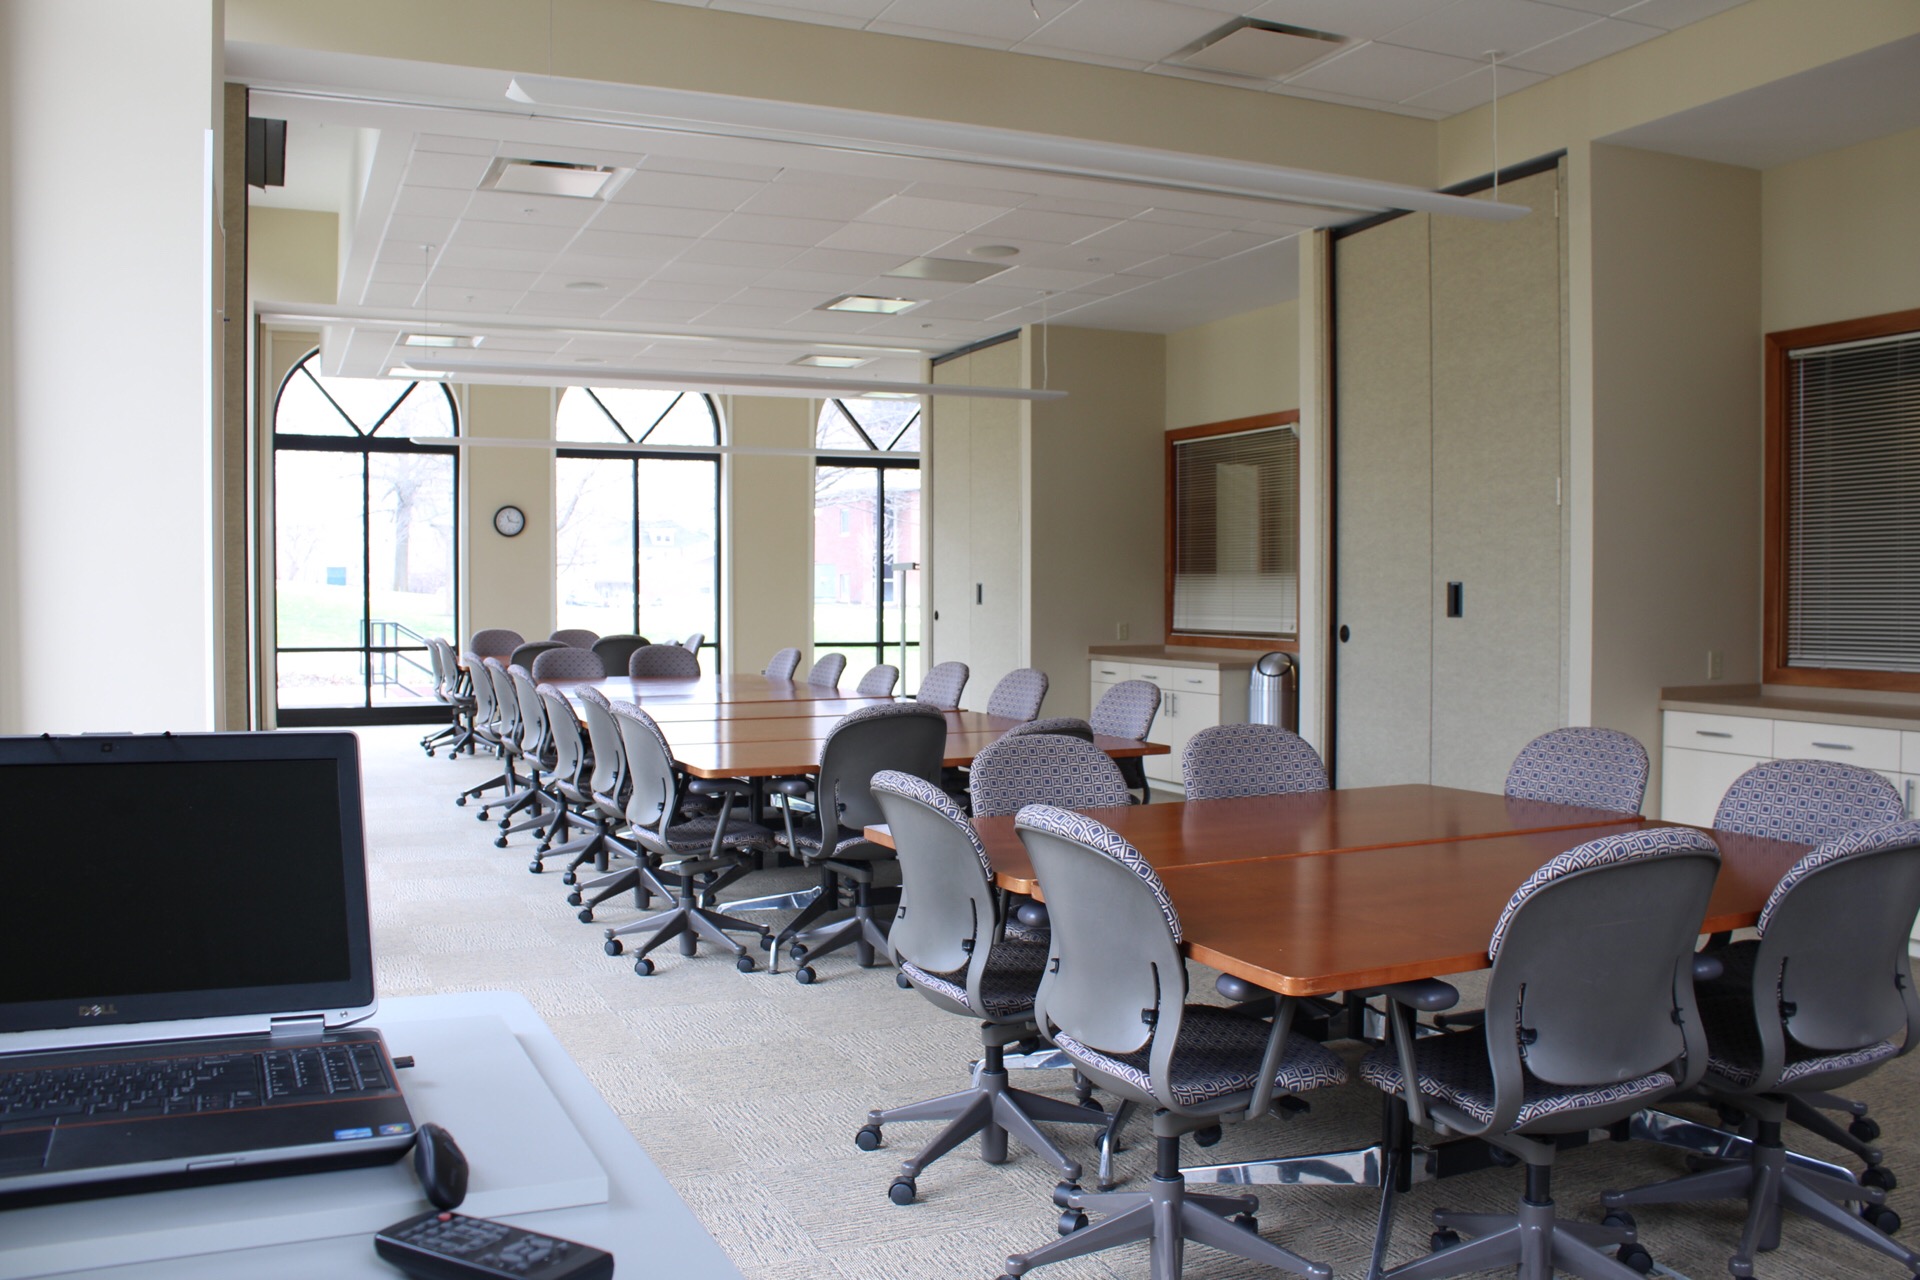 View from South to North end of CATS Conference room showing tables, chairs, storage cabinets and laptop on a movable podium.